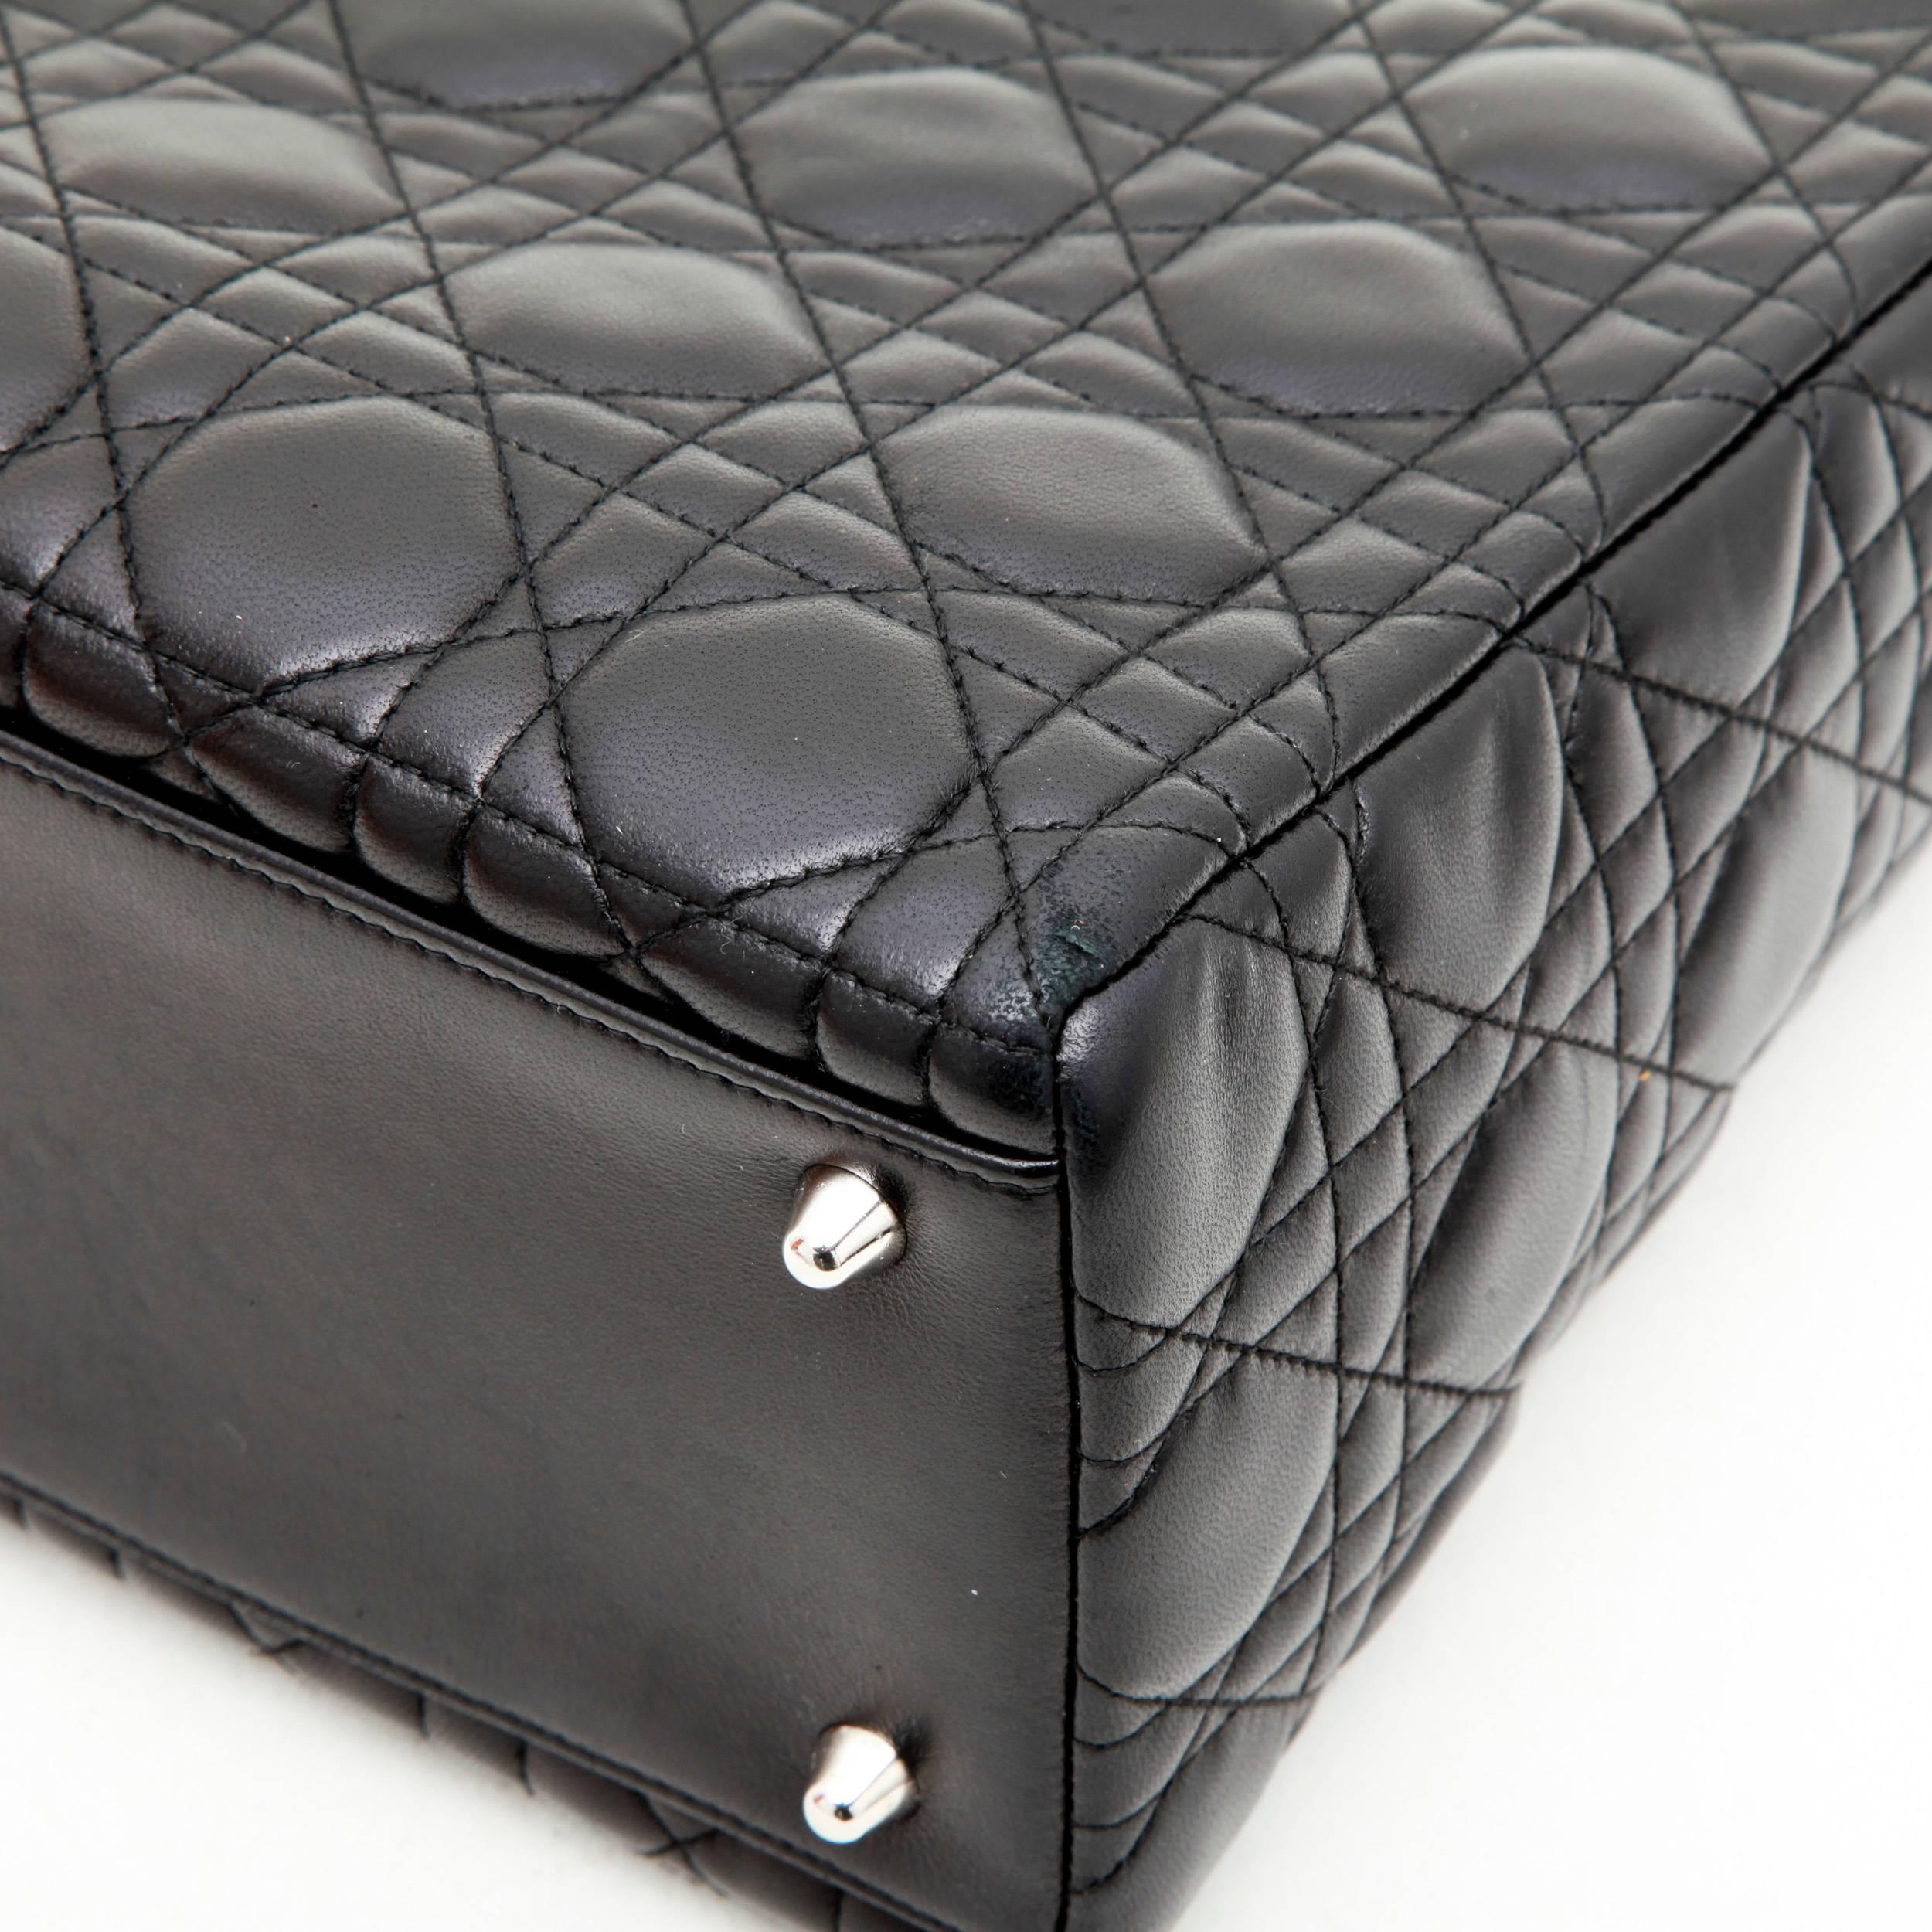 CHRISTIAN DIOR 'Lady Dior' Bag in Black Quilted Leather 3